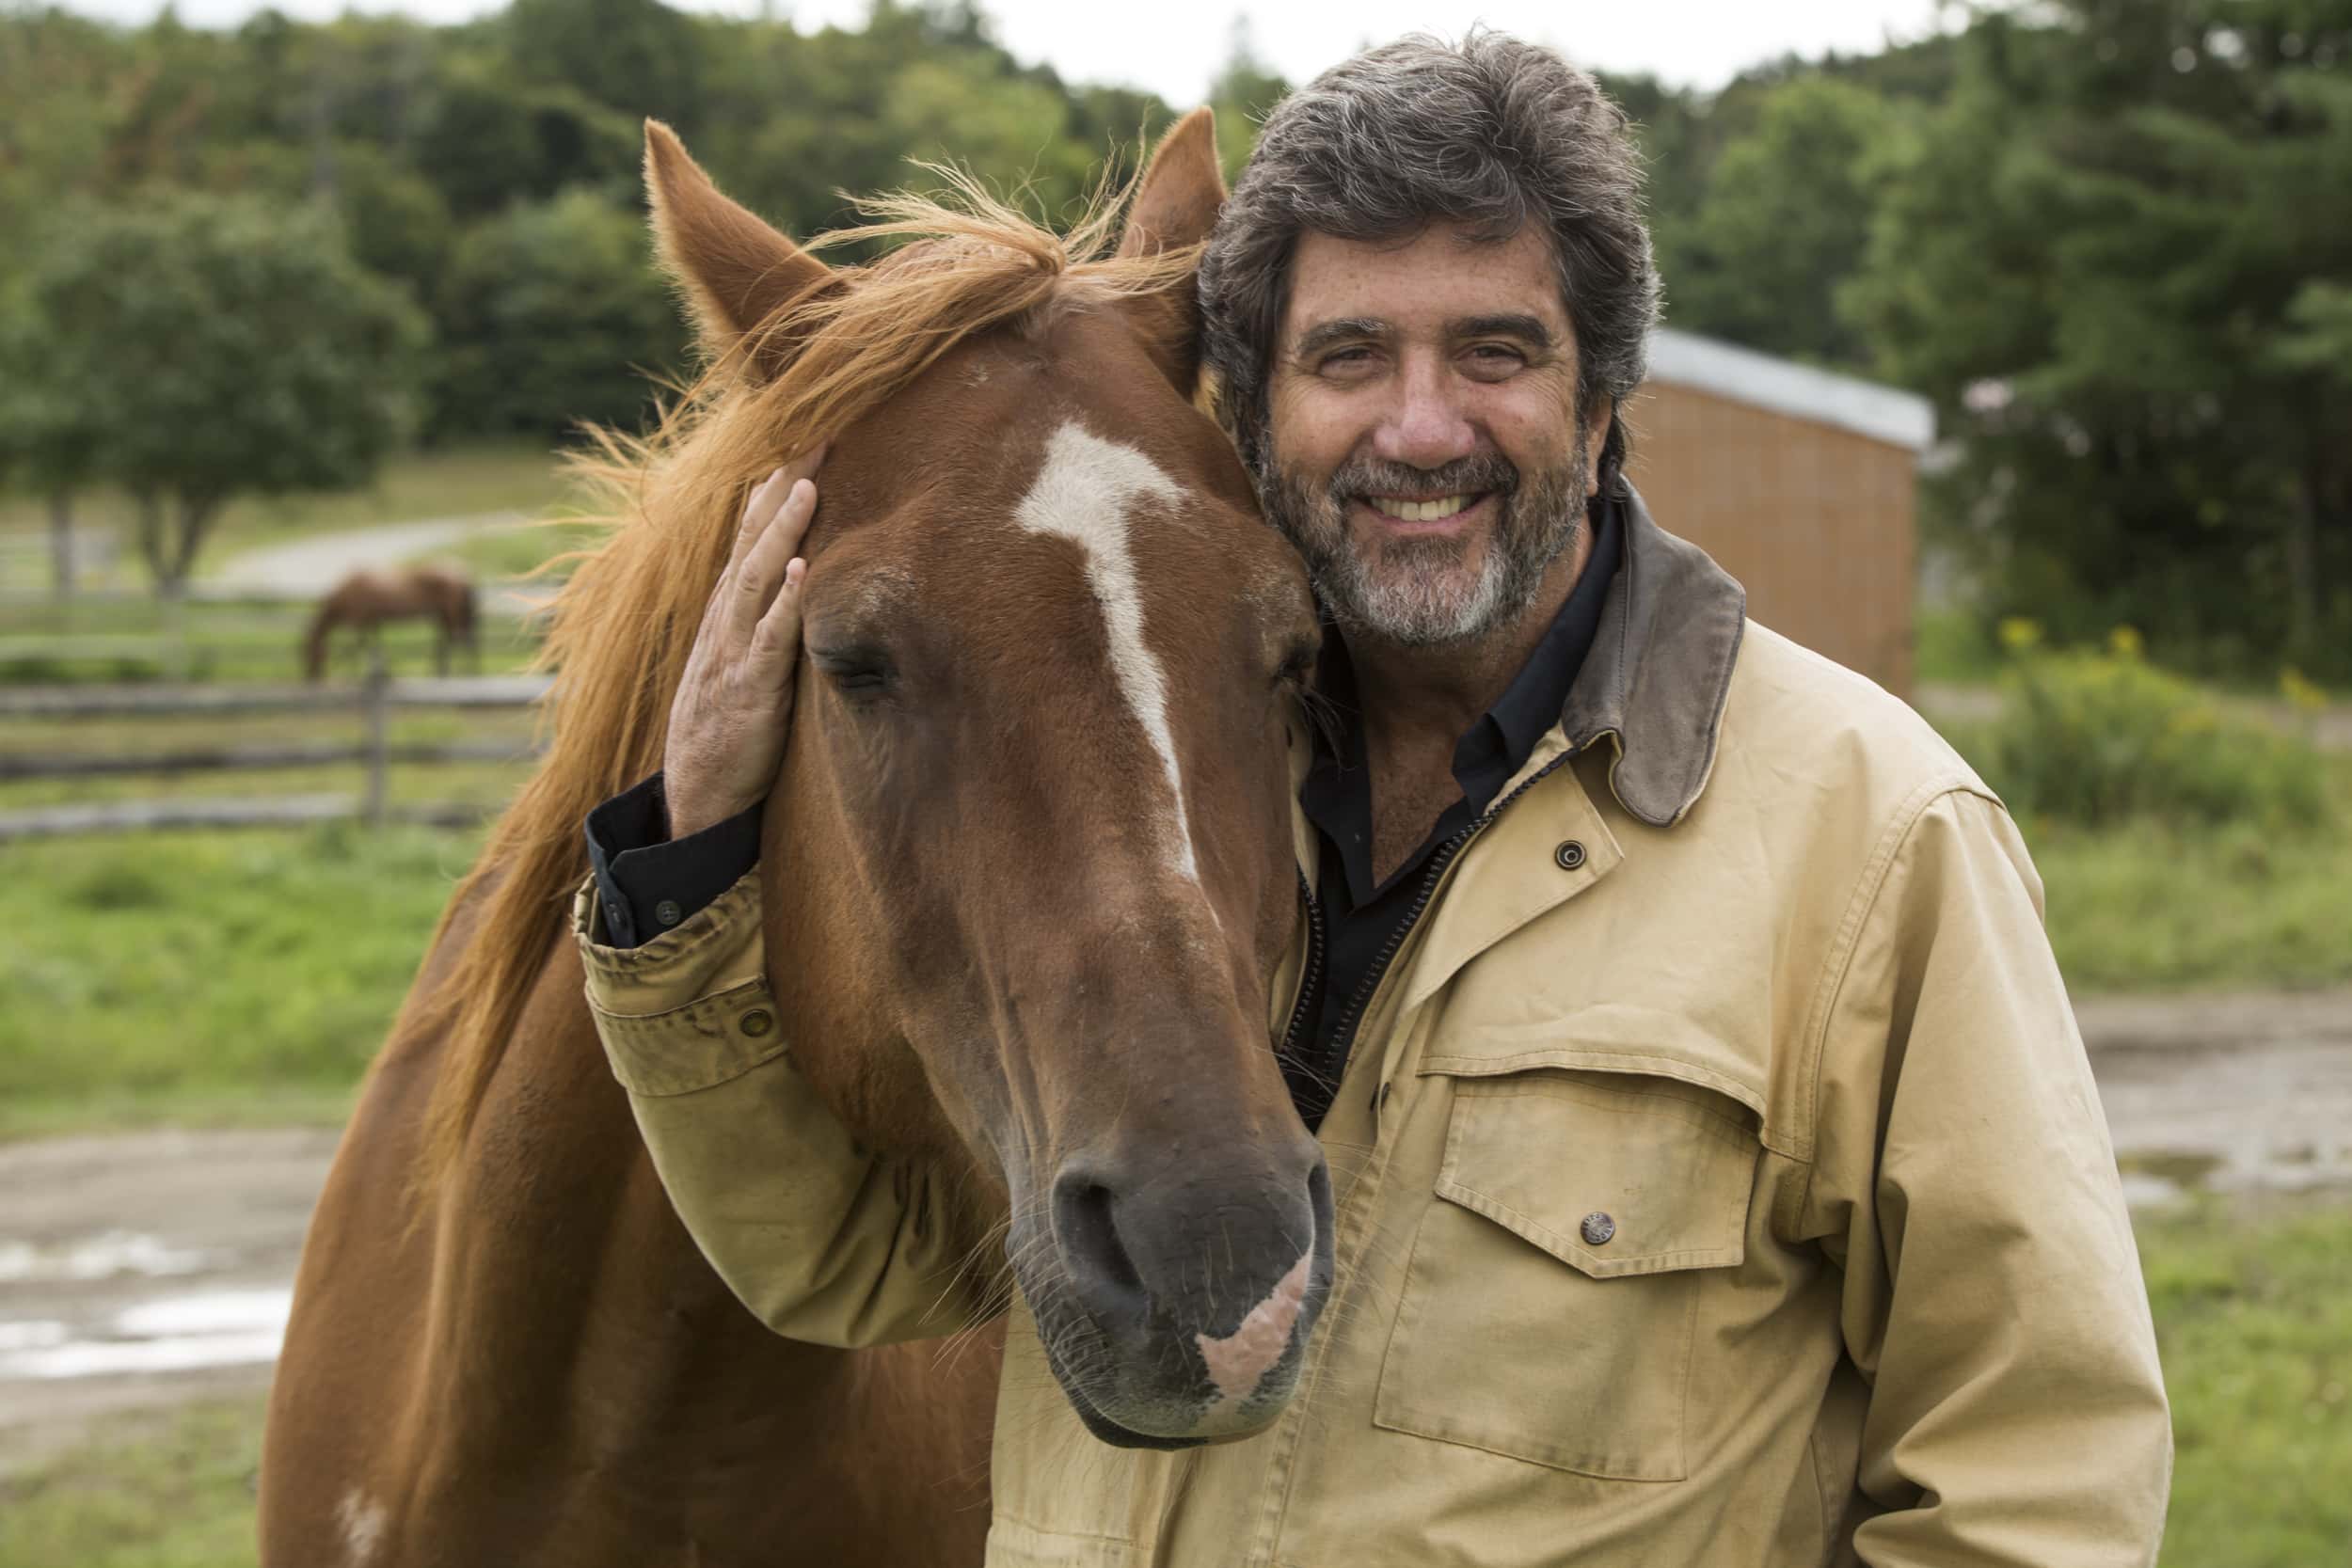 Timothy Hayer smiles at the camera with a arm wrapped around a light brown horse. With a field and another horse in the background.